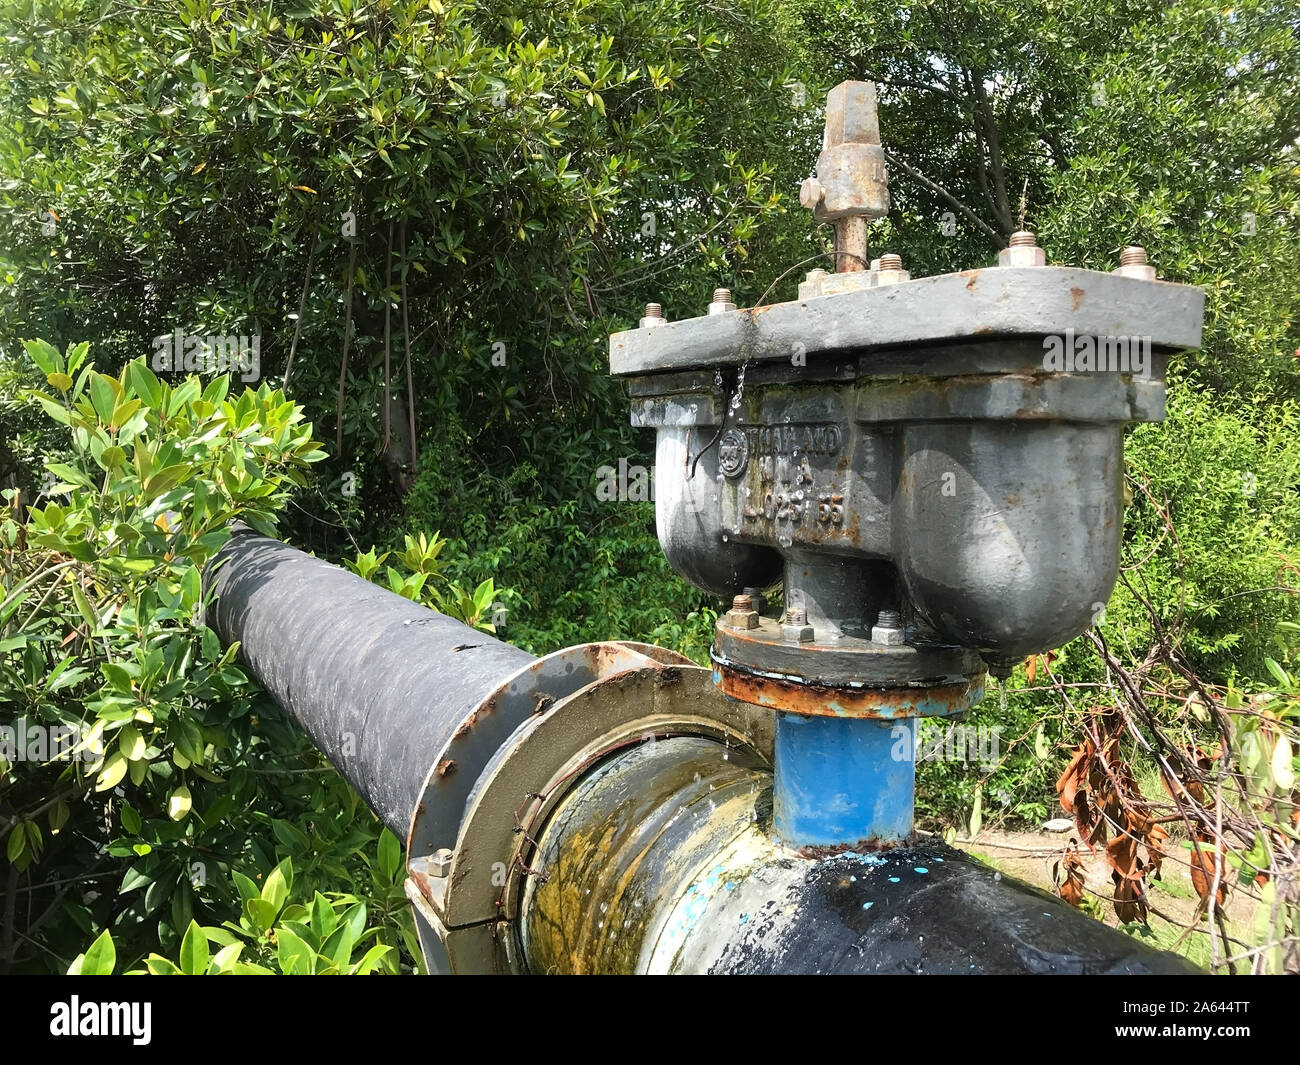 SAMUT PRAKAN, THAILAND, SEP 13 2019, Double Air Valve on steel pipe in tropical nature, Thailand. An Air relief Valve in water system supply. Stock Photo